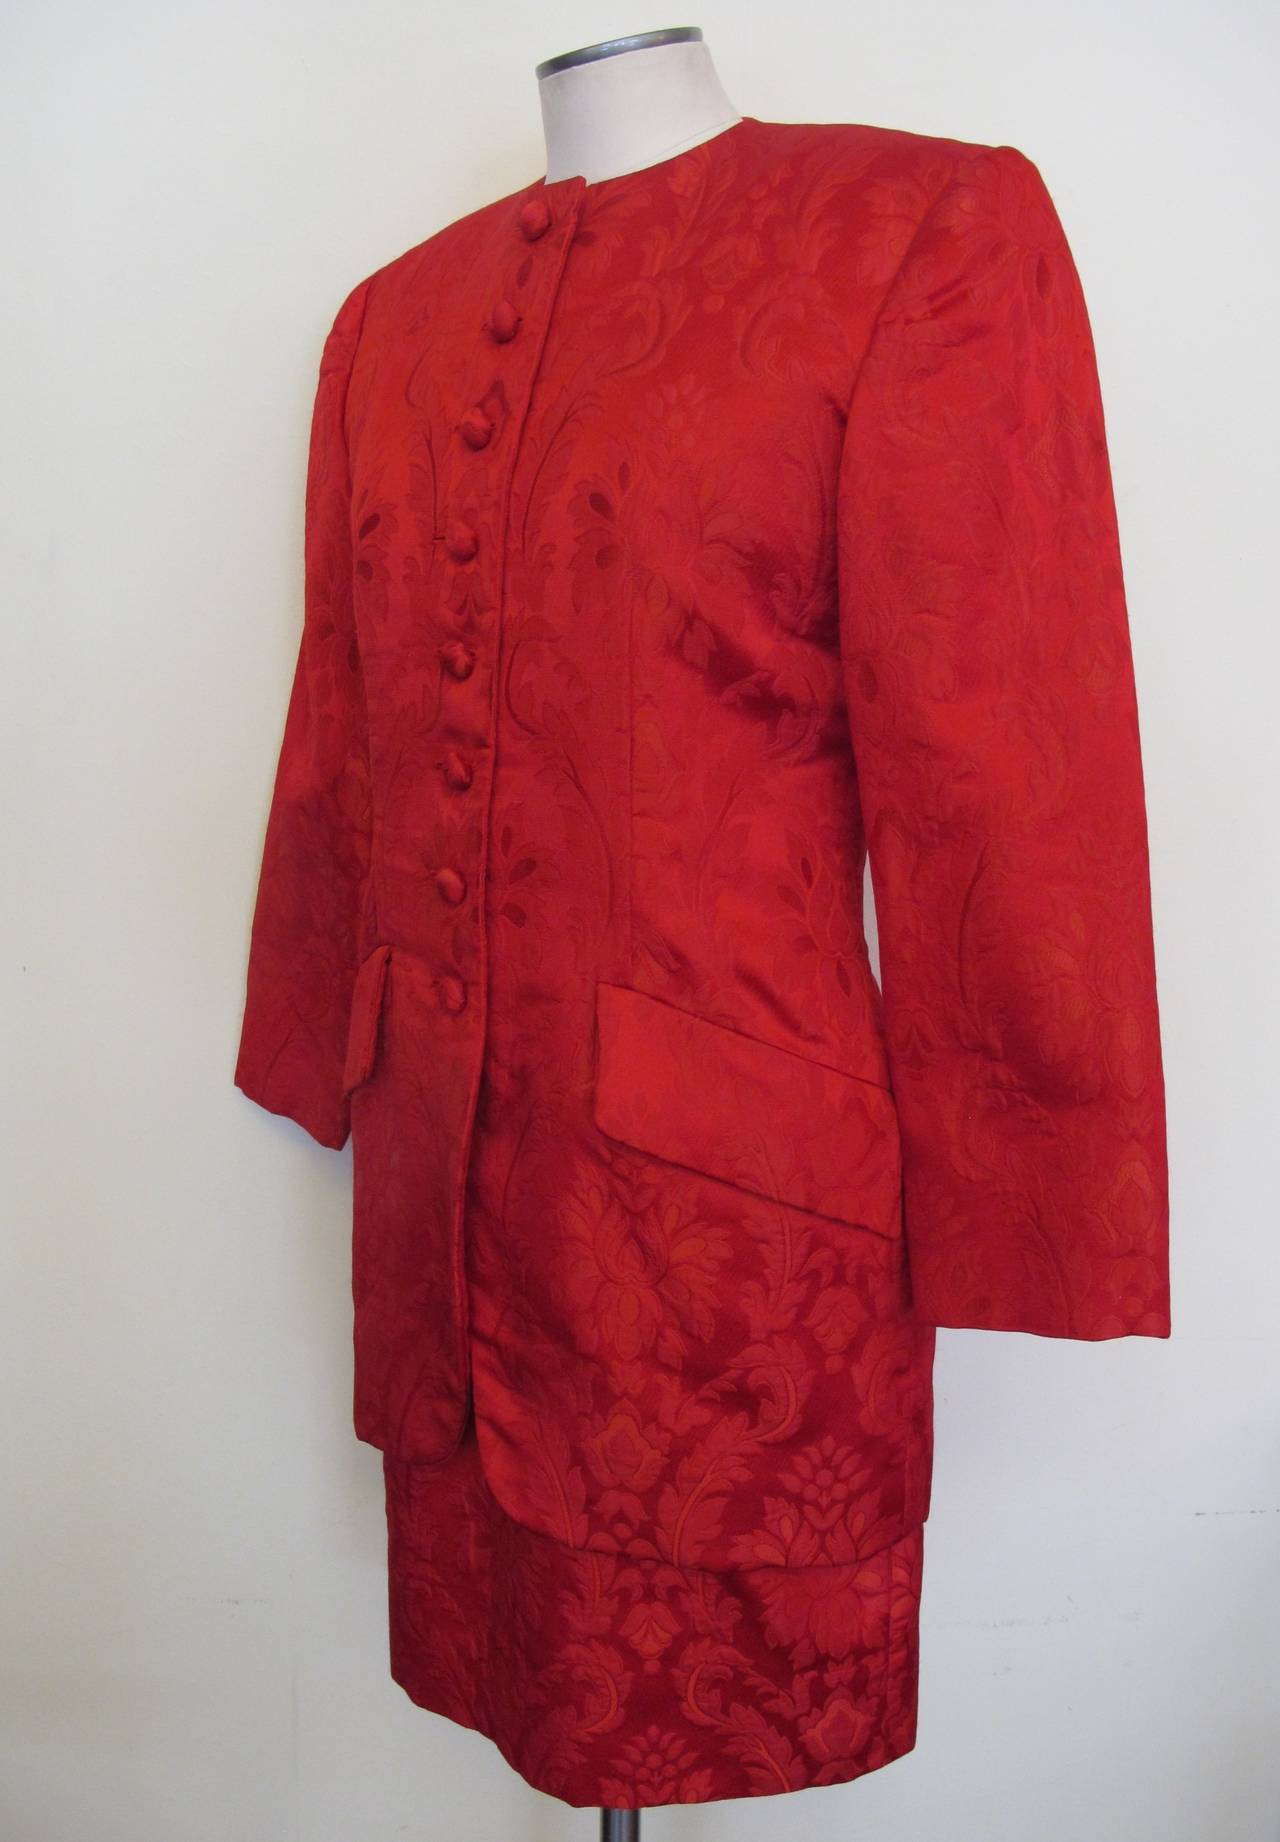 Carolyne Roehm Red Ensemble In Excellent Condition For Sale In San Francisco, CA